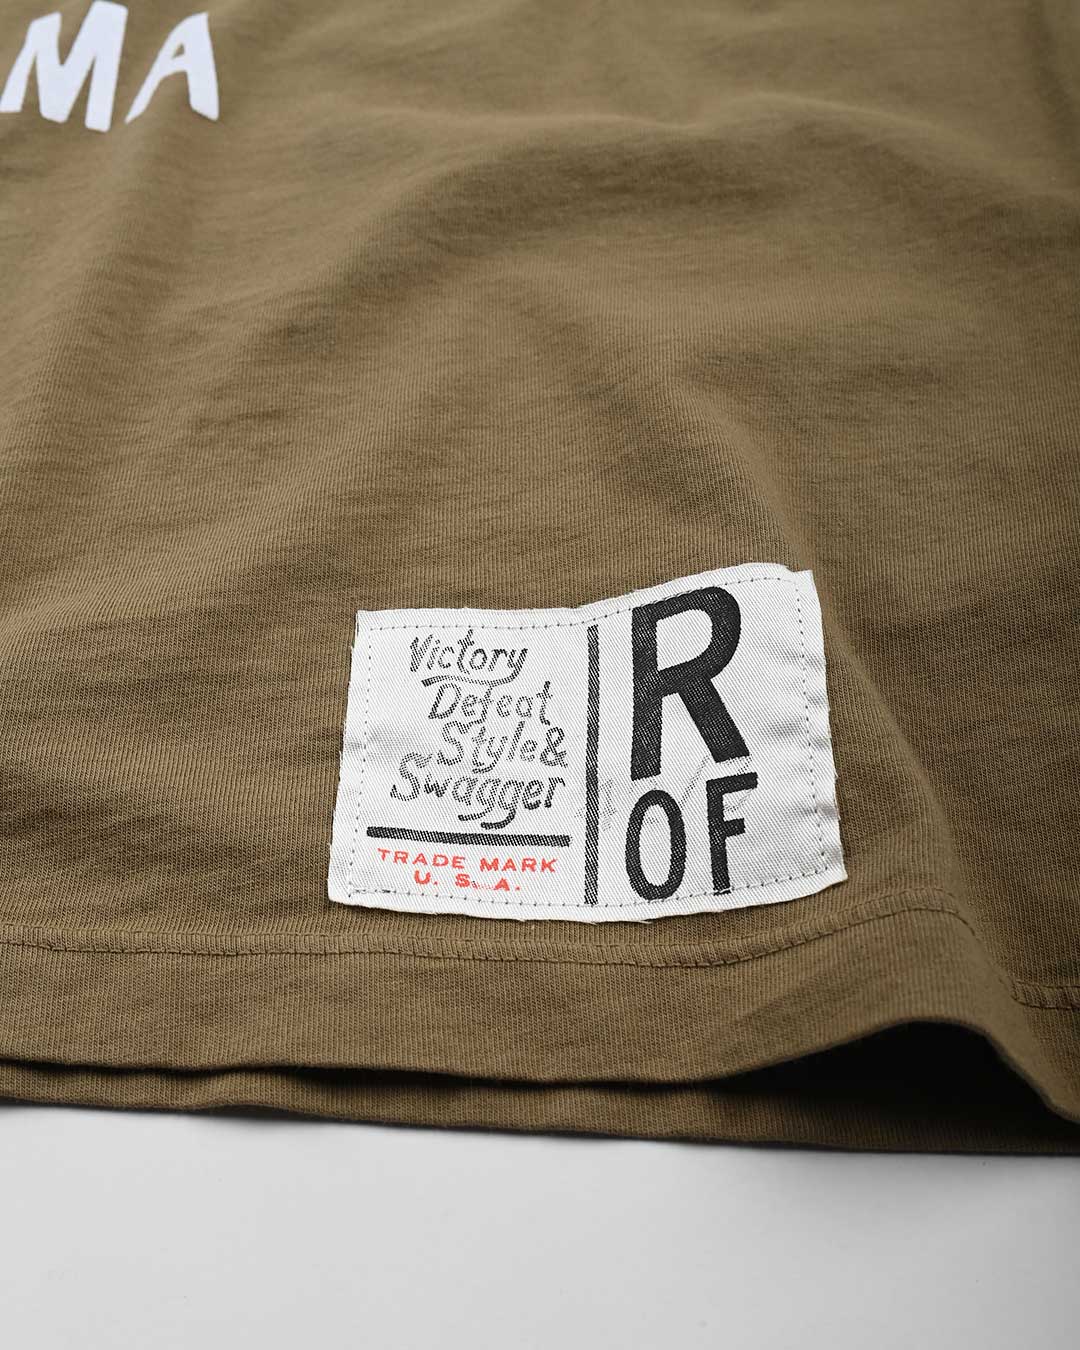 Roberto Duran Panama Olive Tee - Roots of Fight Canada